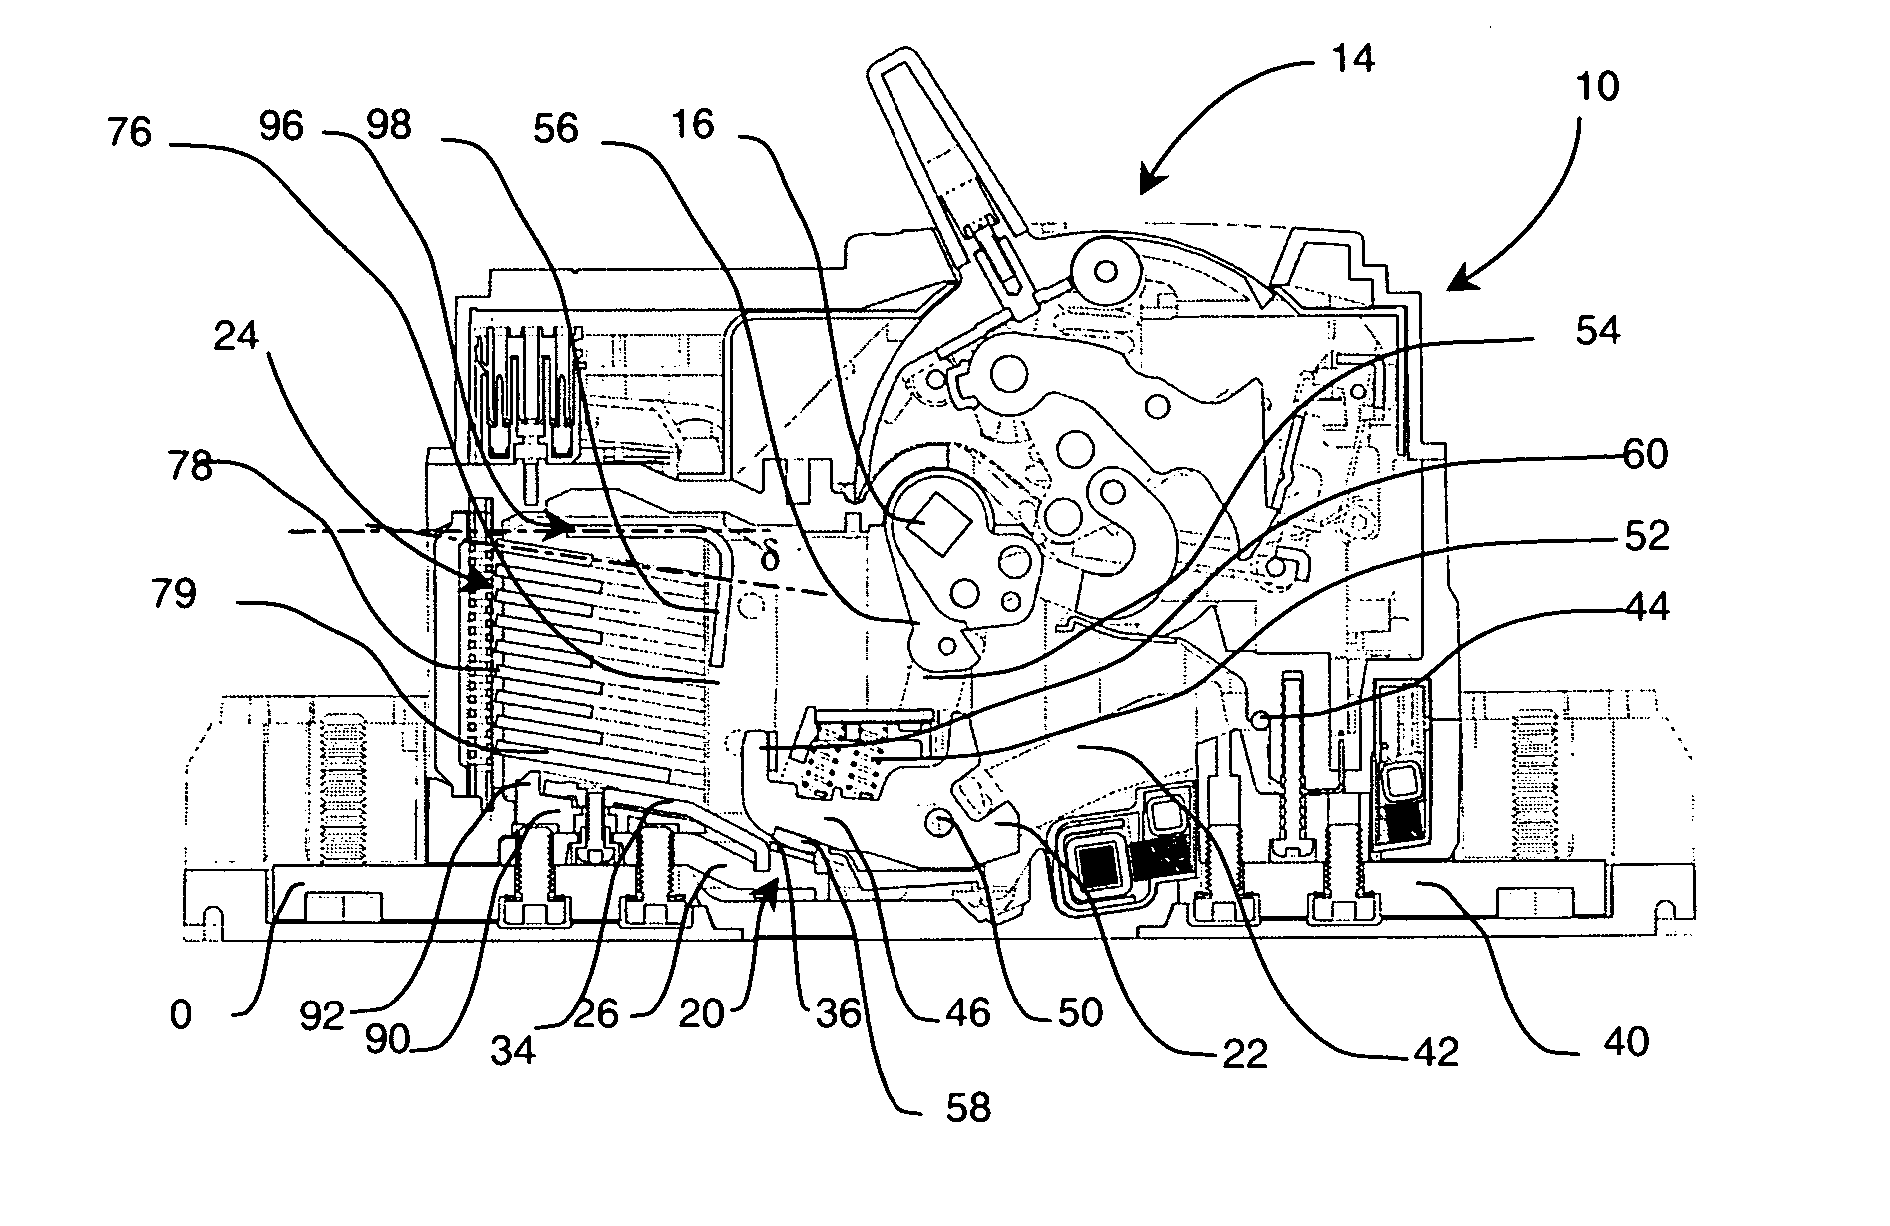 Switchgear device comprising an arc chute of reduced size